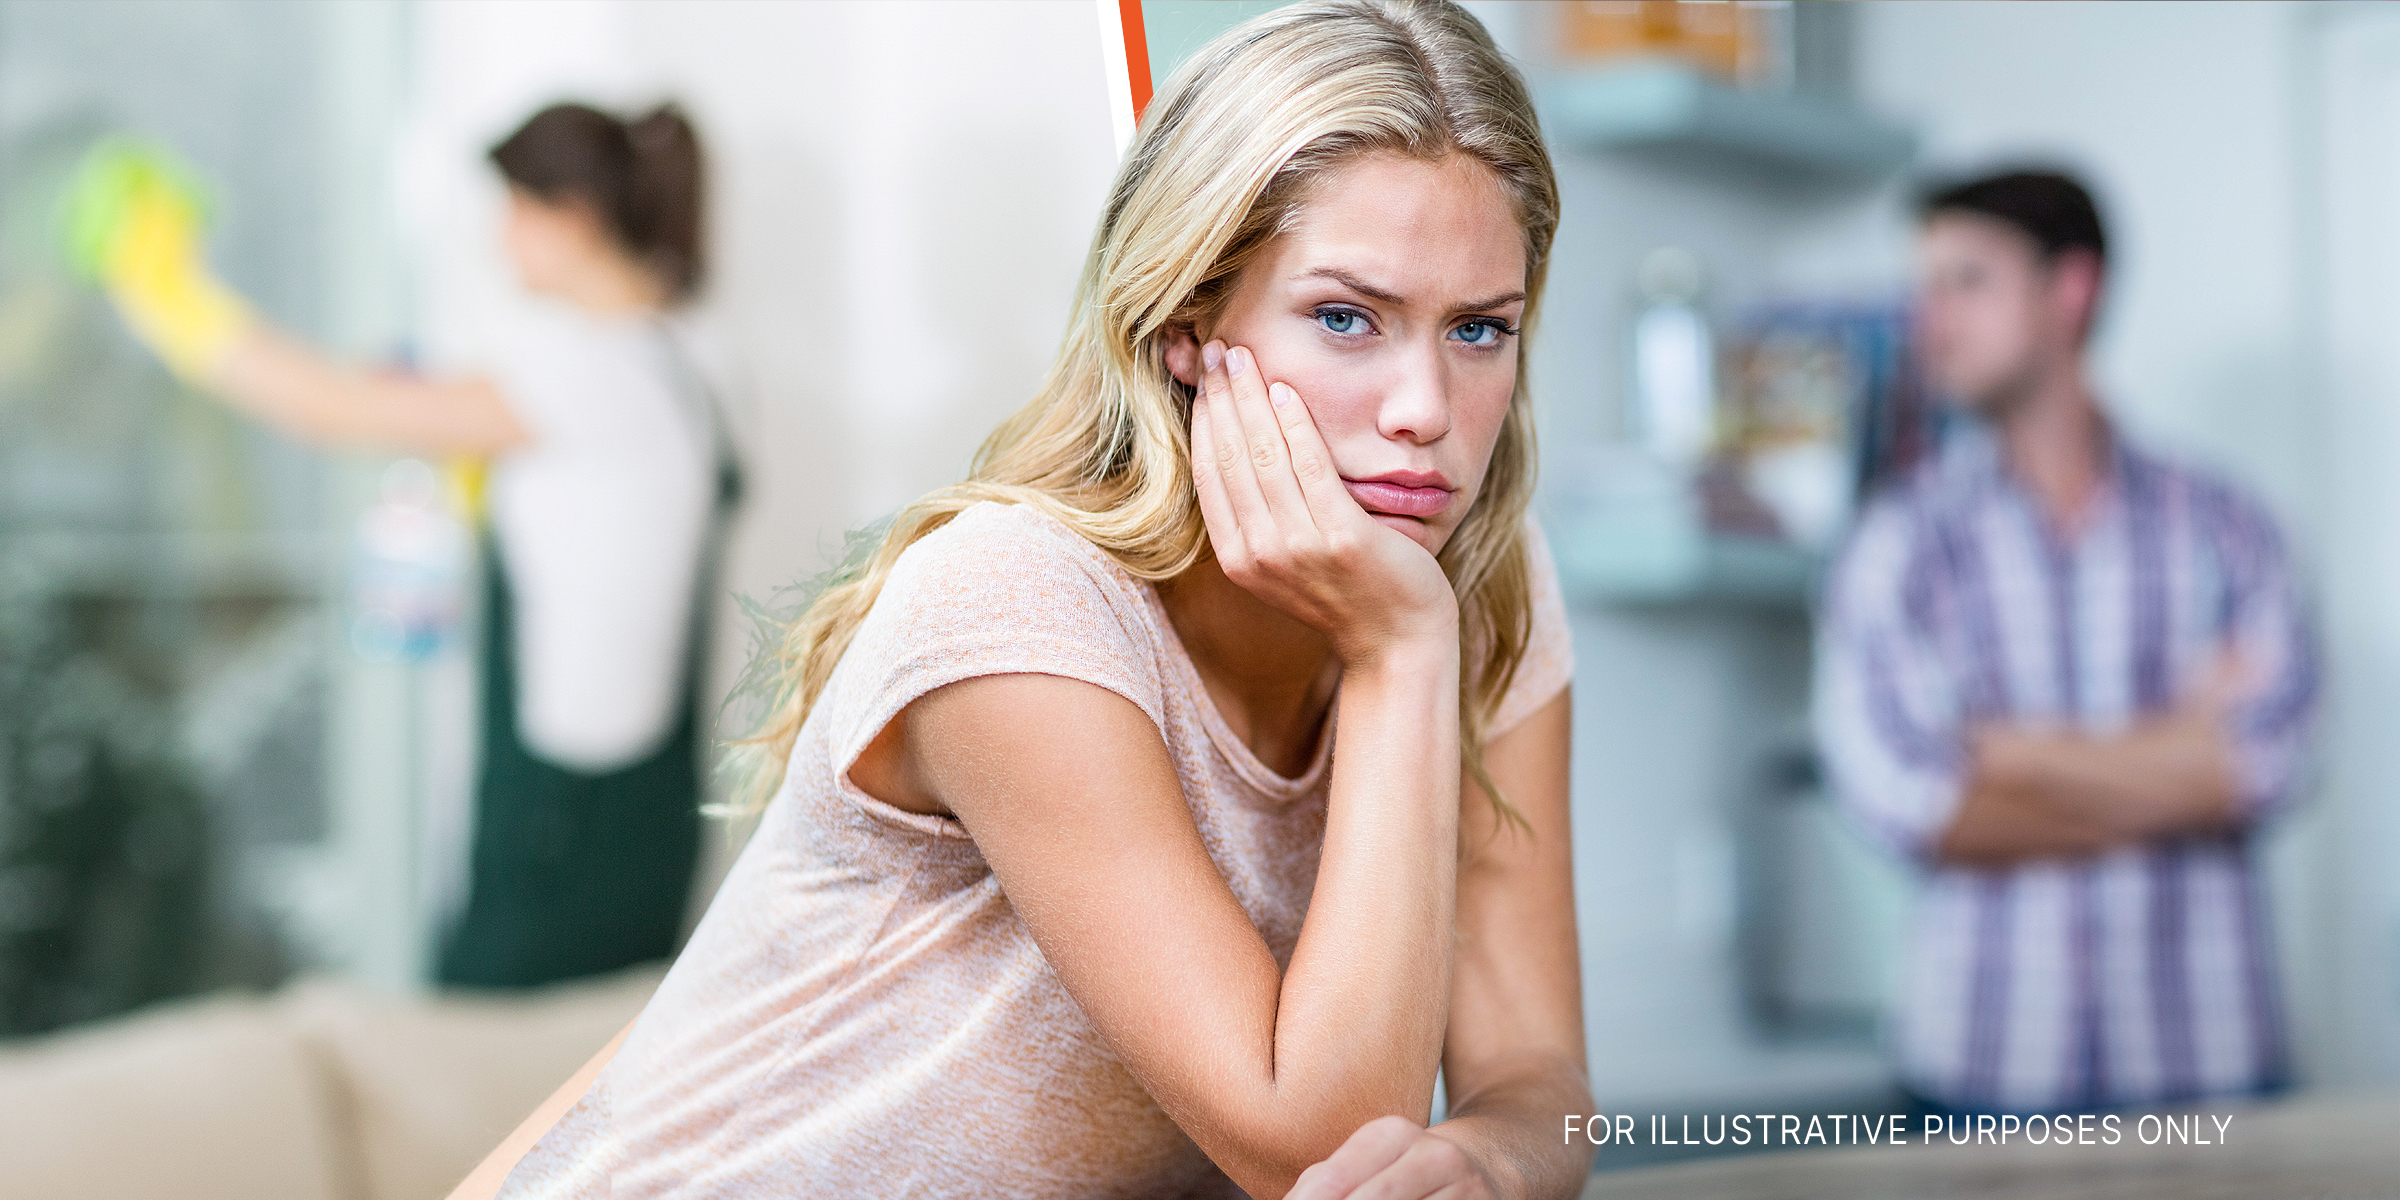 Woman frowning | Source: Shutterstock